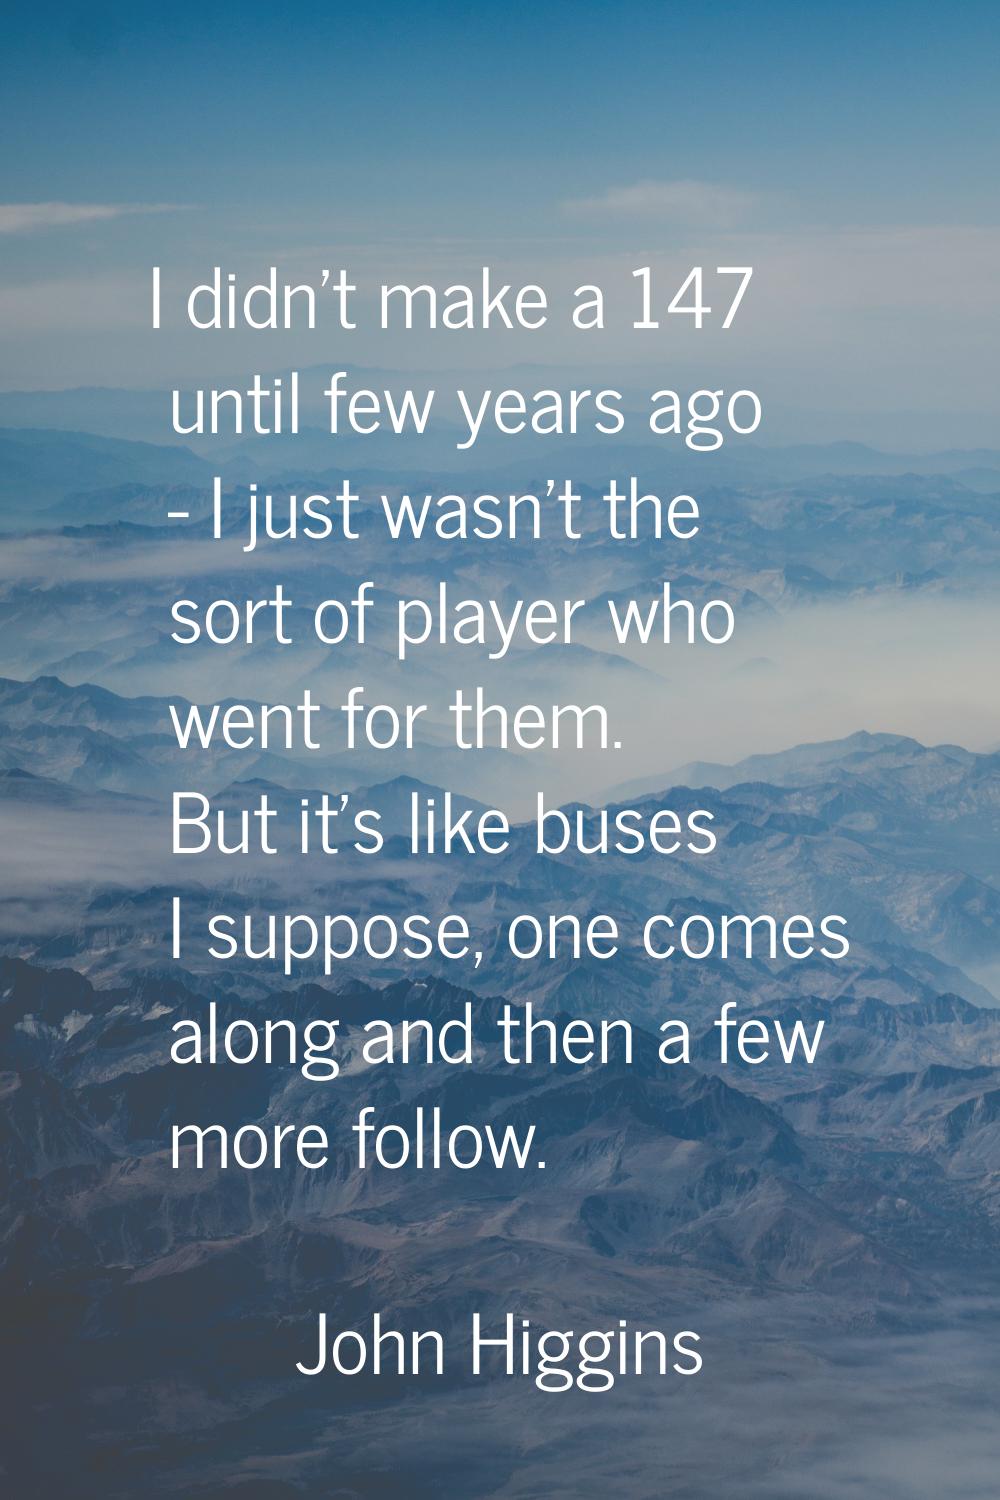 I didn't make a 147 until few years ago - I just wasn't the sort of player who went for them. But i